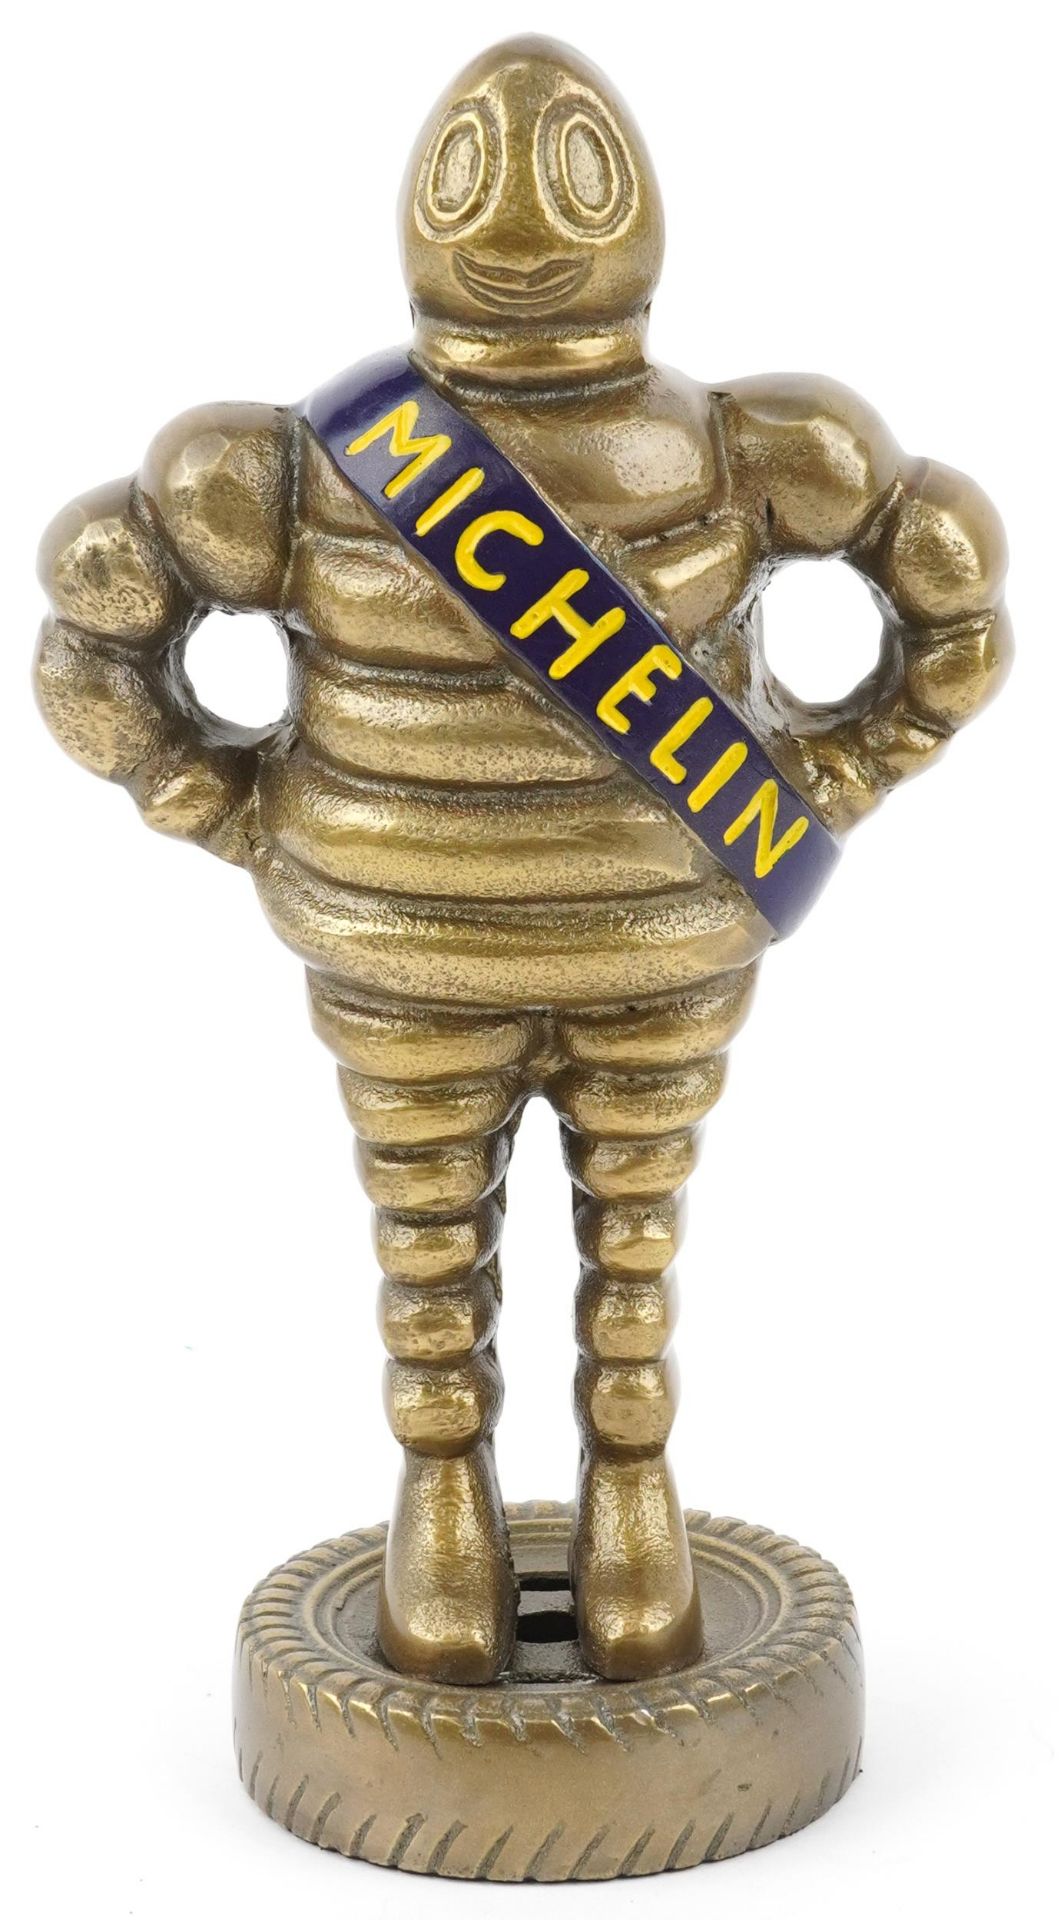 Gilt painted metal advertising figure of a Michelin Man, 28cm high